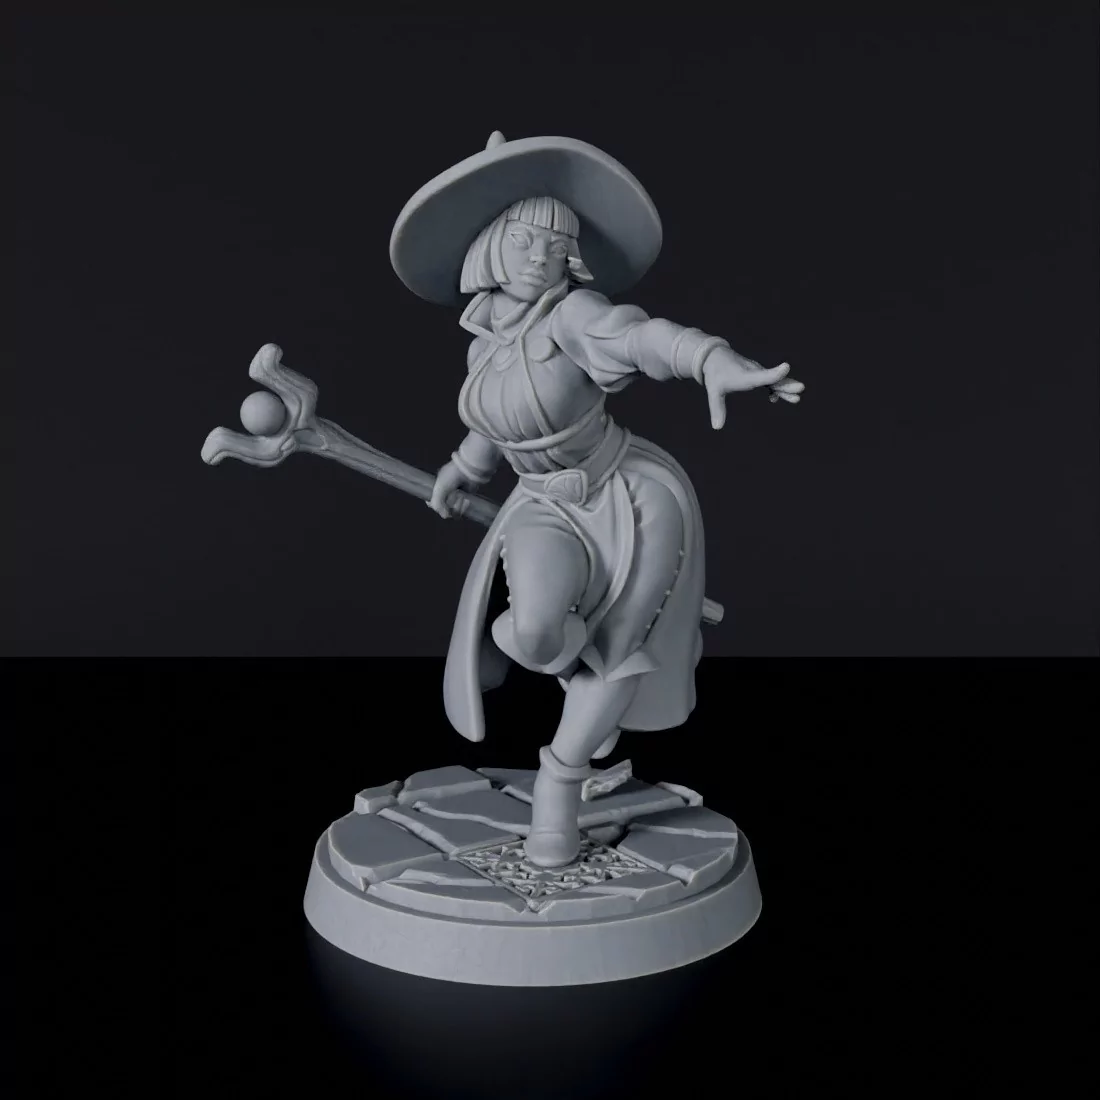 Miniature of Human Female Sorcerer ver. 2 with wand and hat for fantasy tabletop role-playing games